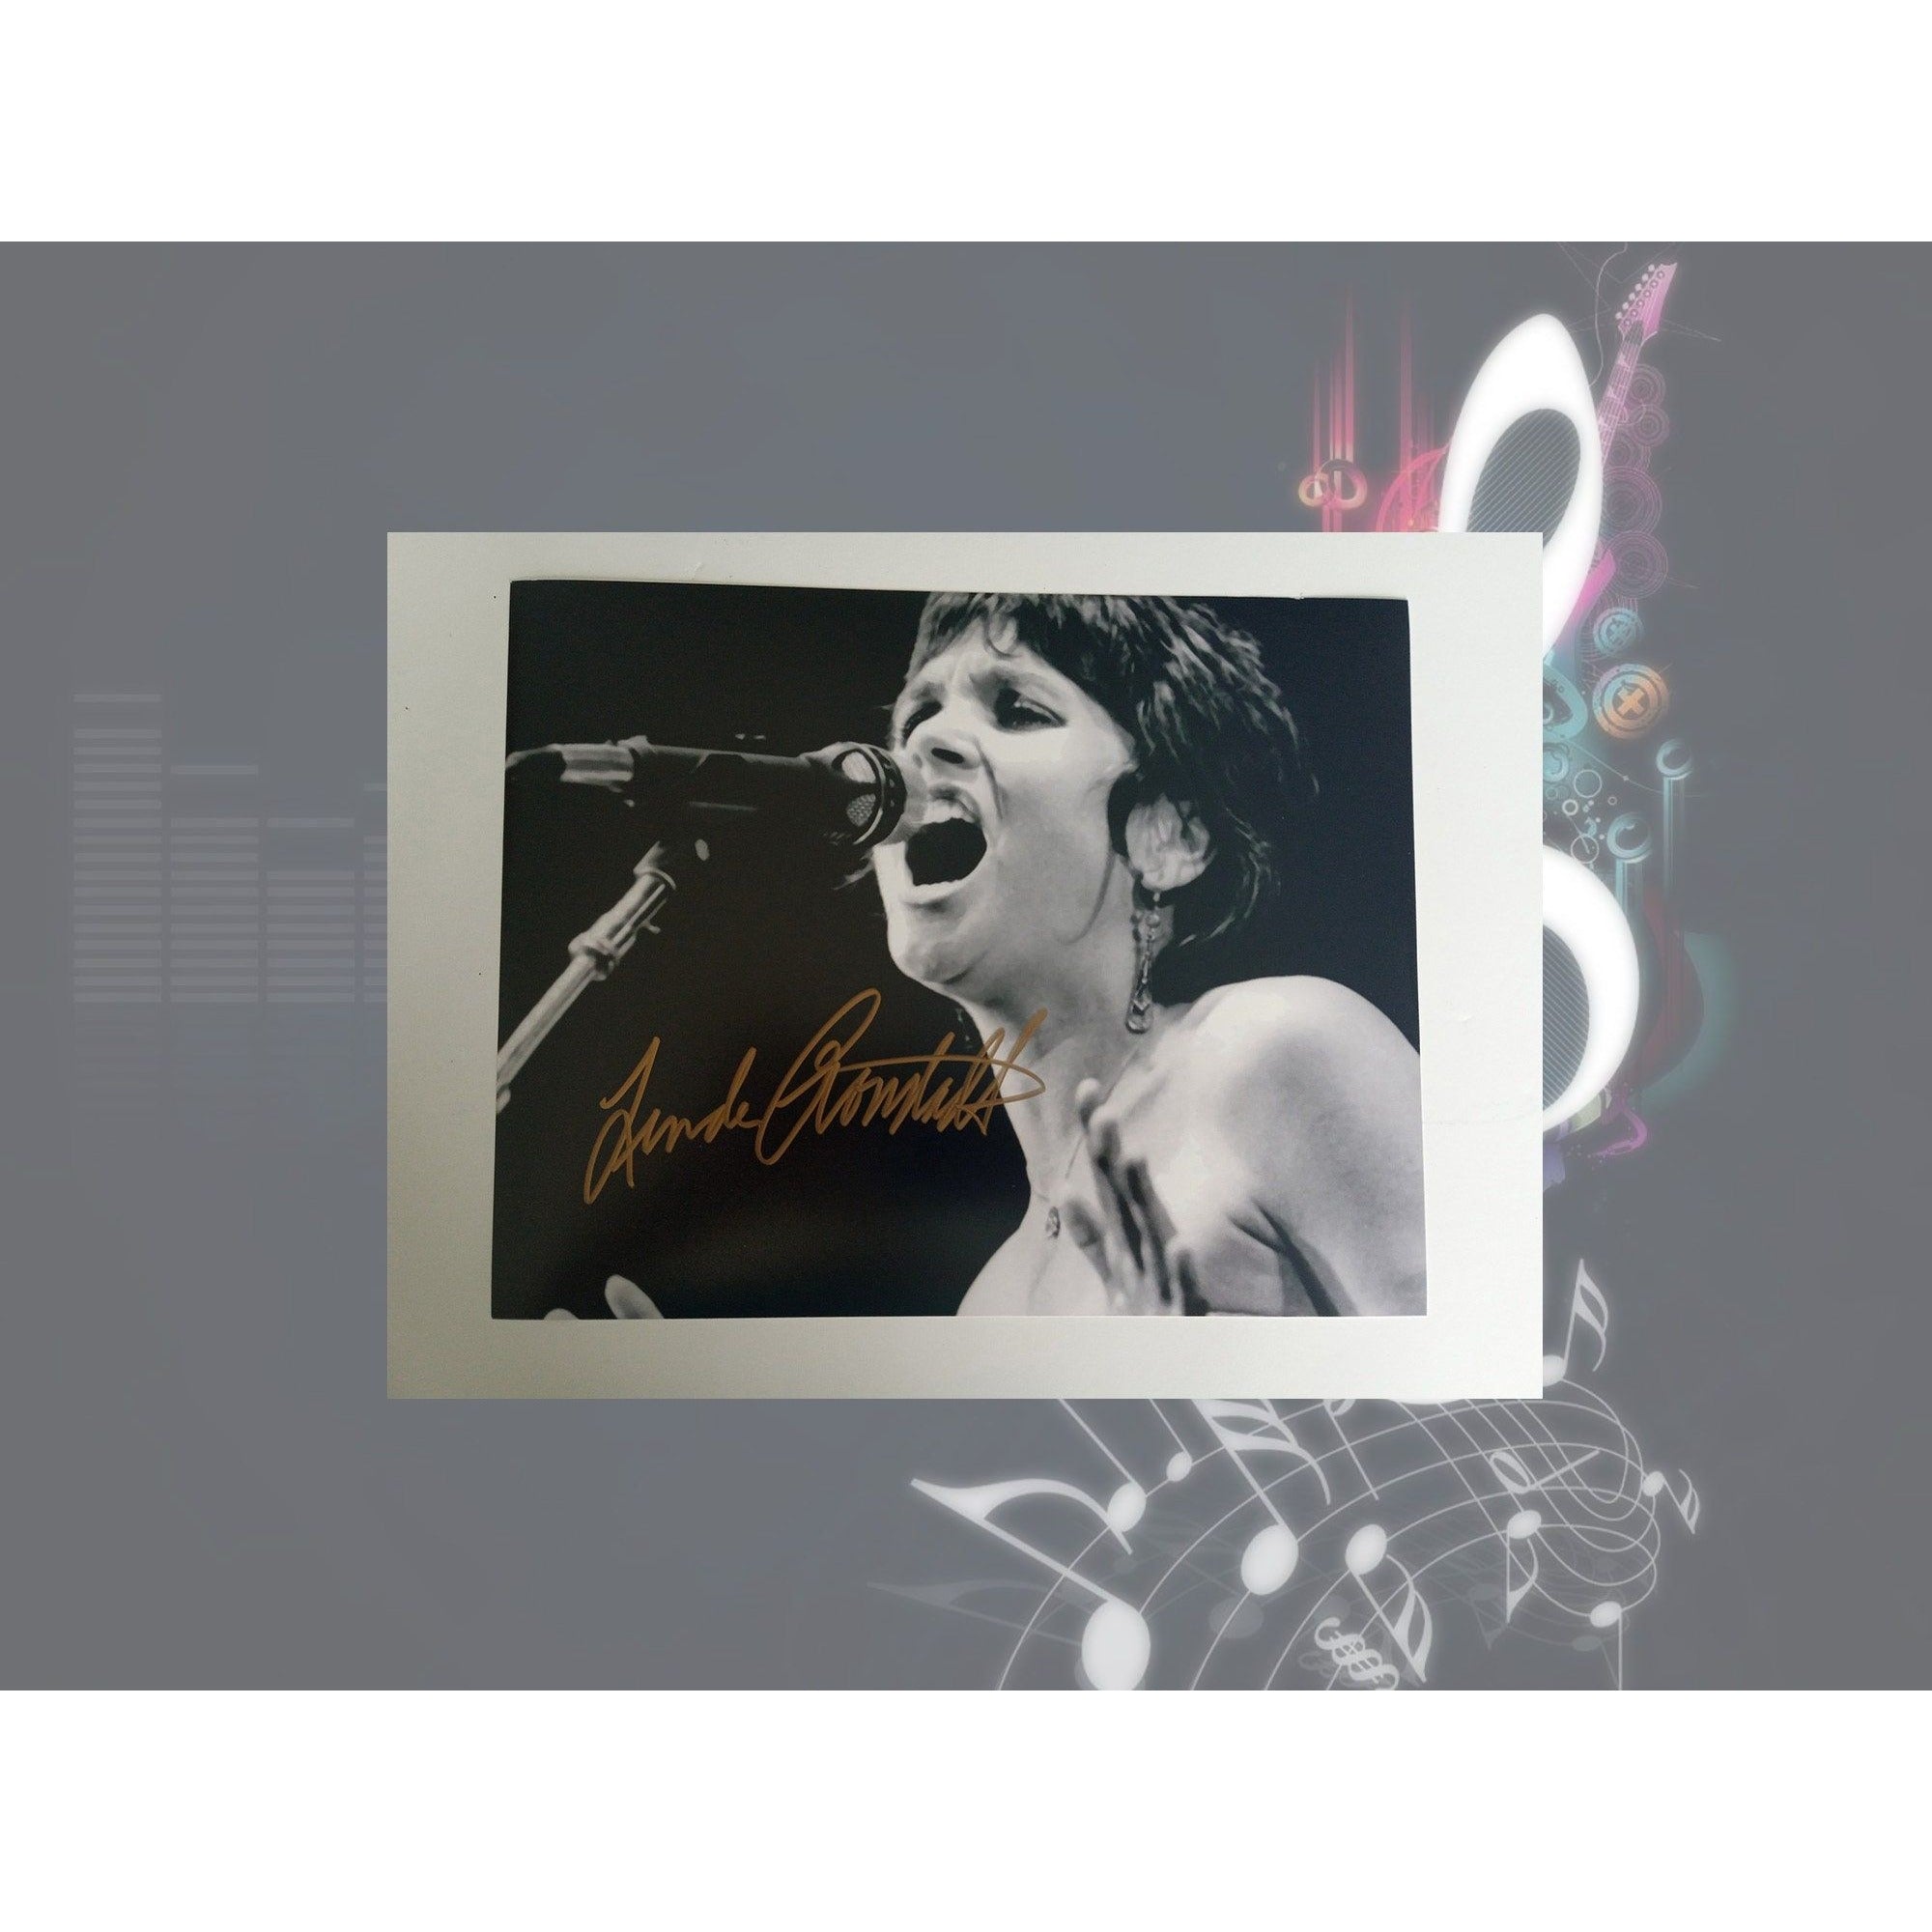 Linda Ronstadt 8 by 10 signed photo with proof